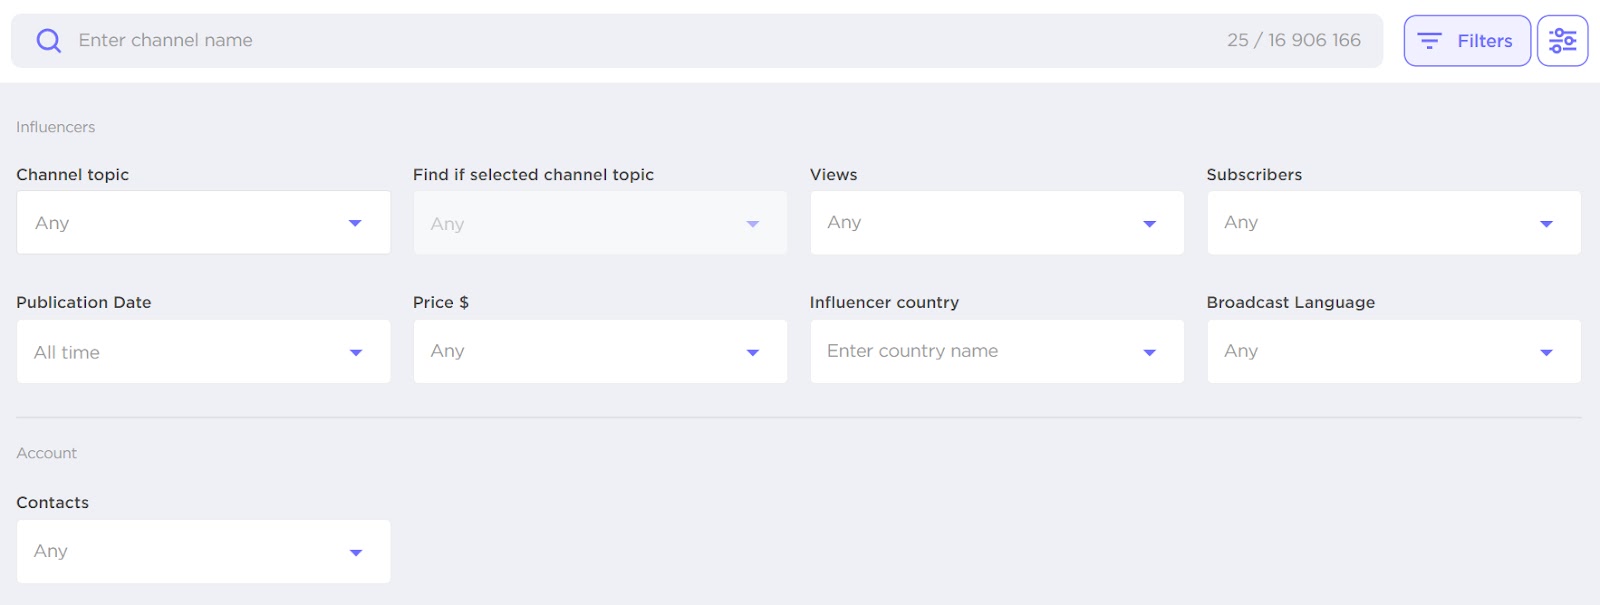 Filters section in Influencer Analytics